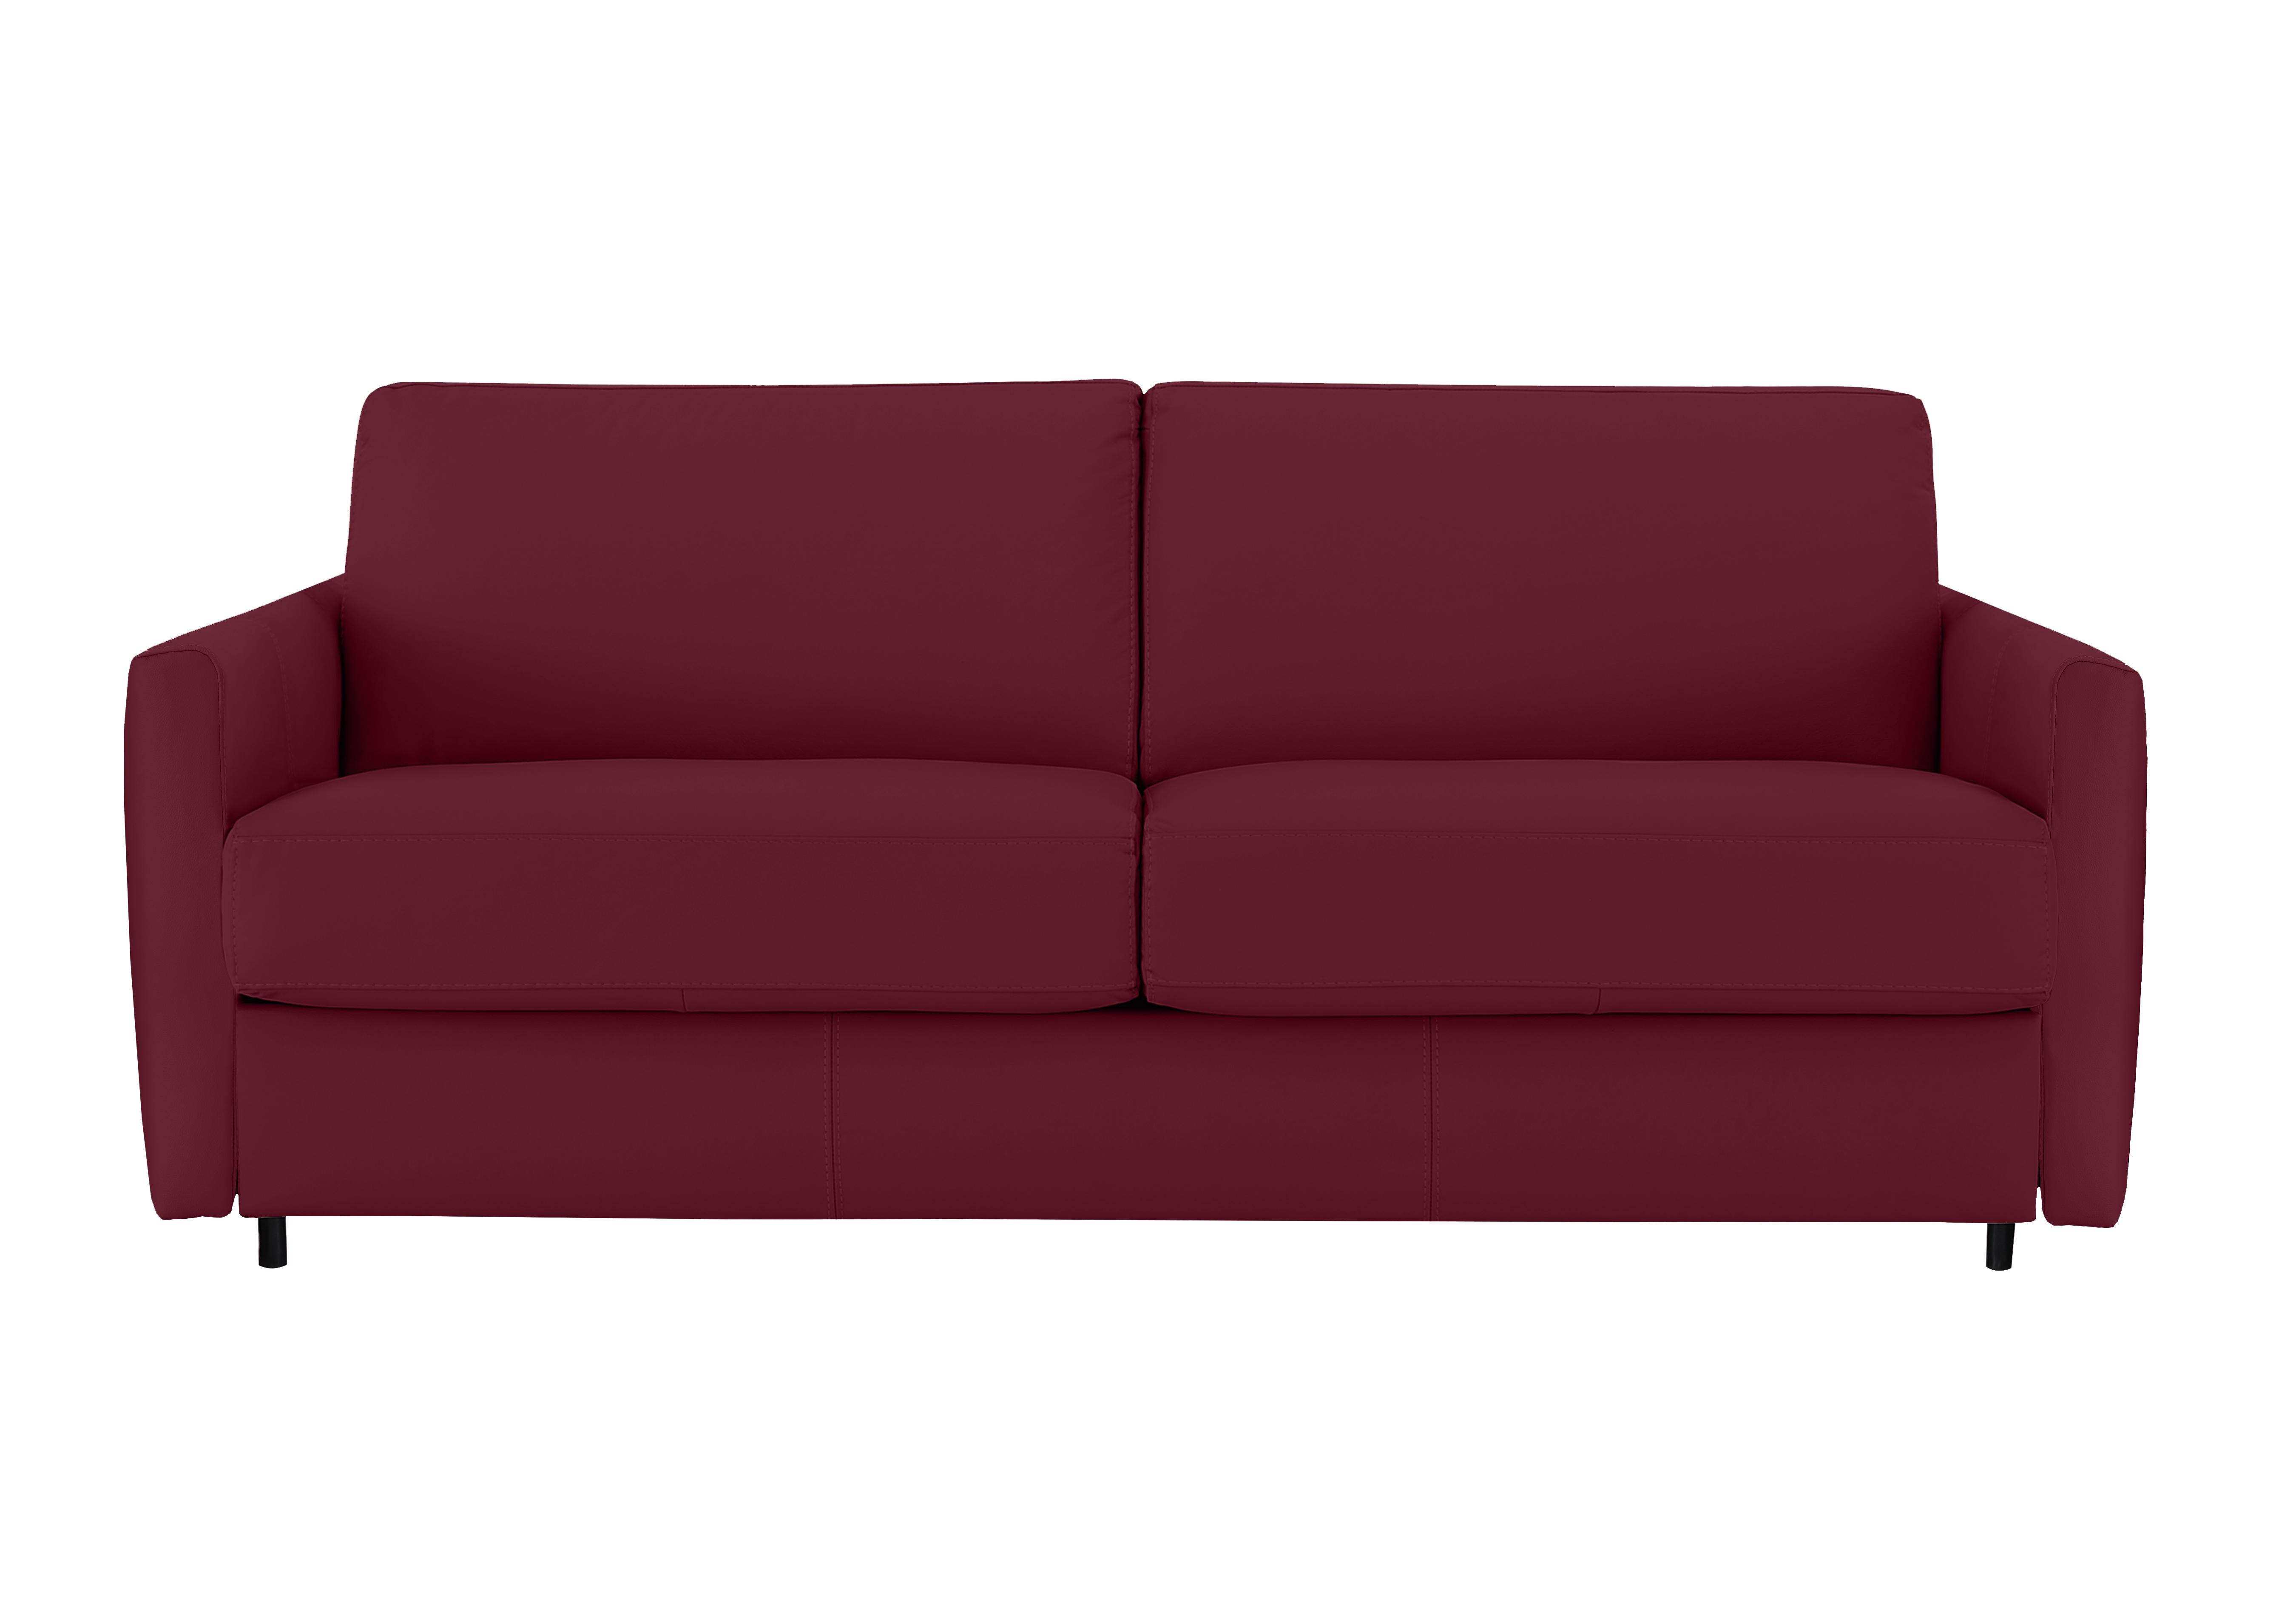 Alcova 3 Seater Leather Sofa Bed with Slim Arms in Dali Bordeaux 1521 on Furniture Village